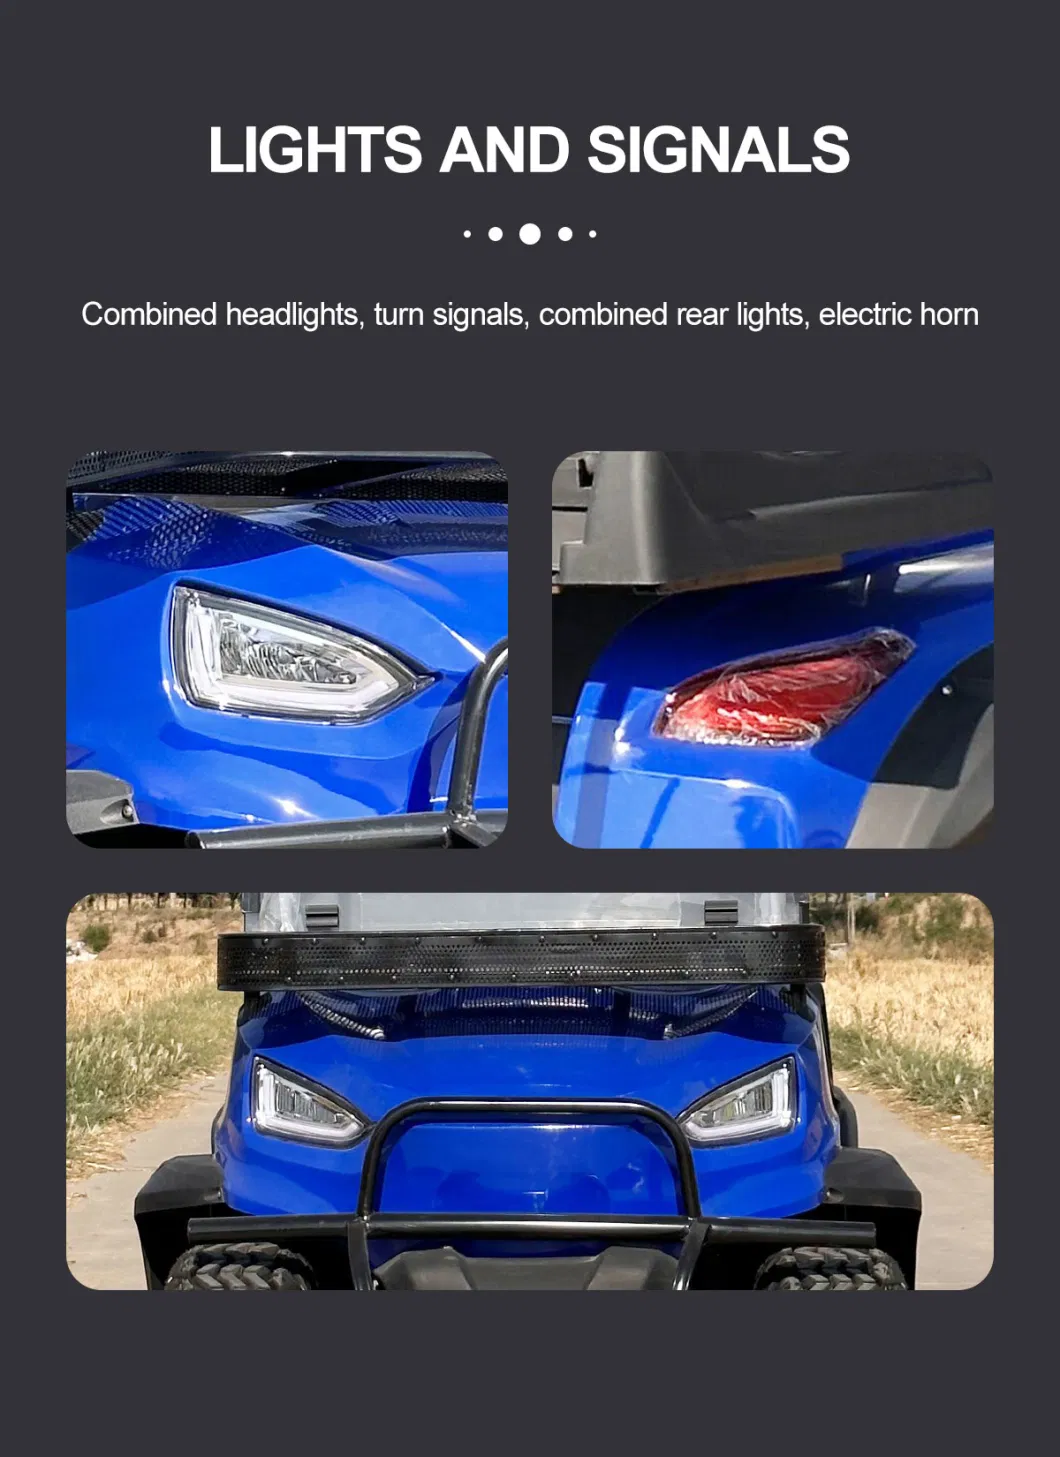 Wholesale Custom Utility Hunting Luxury Sport The Village Fast Golf Carts Blue Green Battery 4 Wheel 2+2 Passenger Electric Cheap Small Mini Cart with 4 Seats